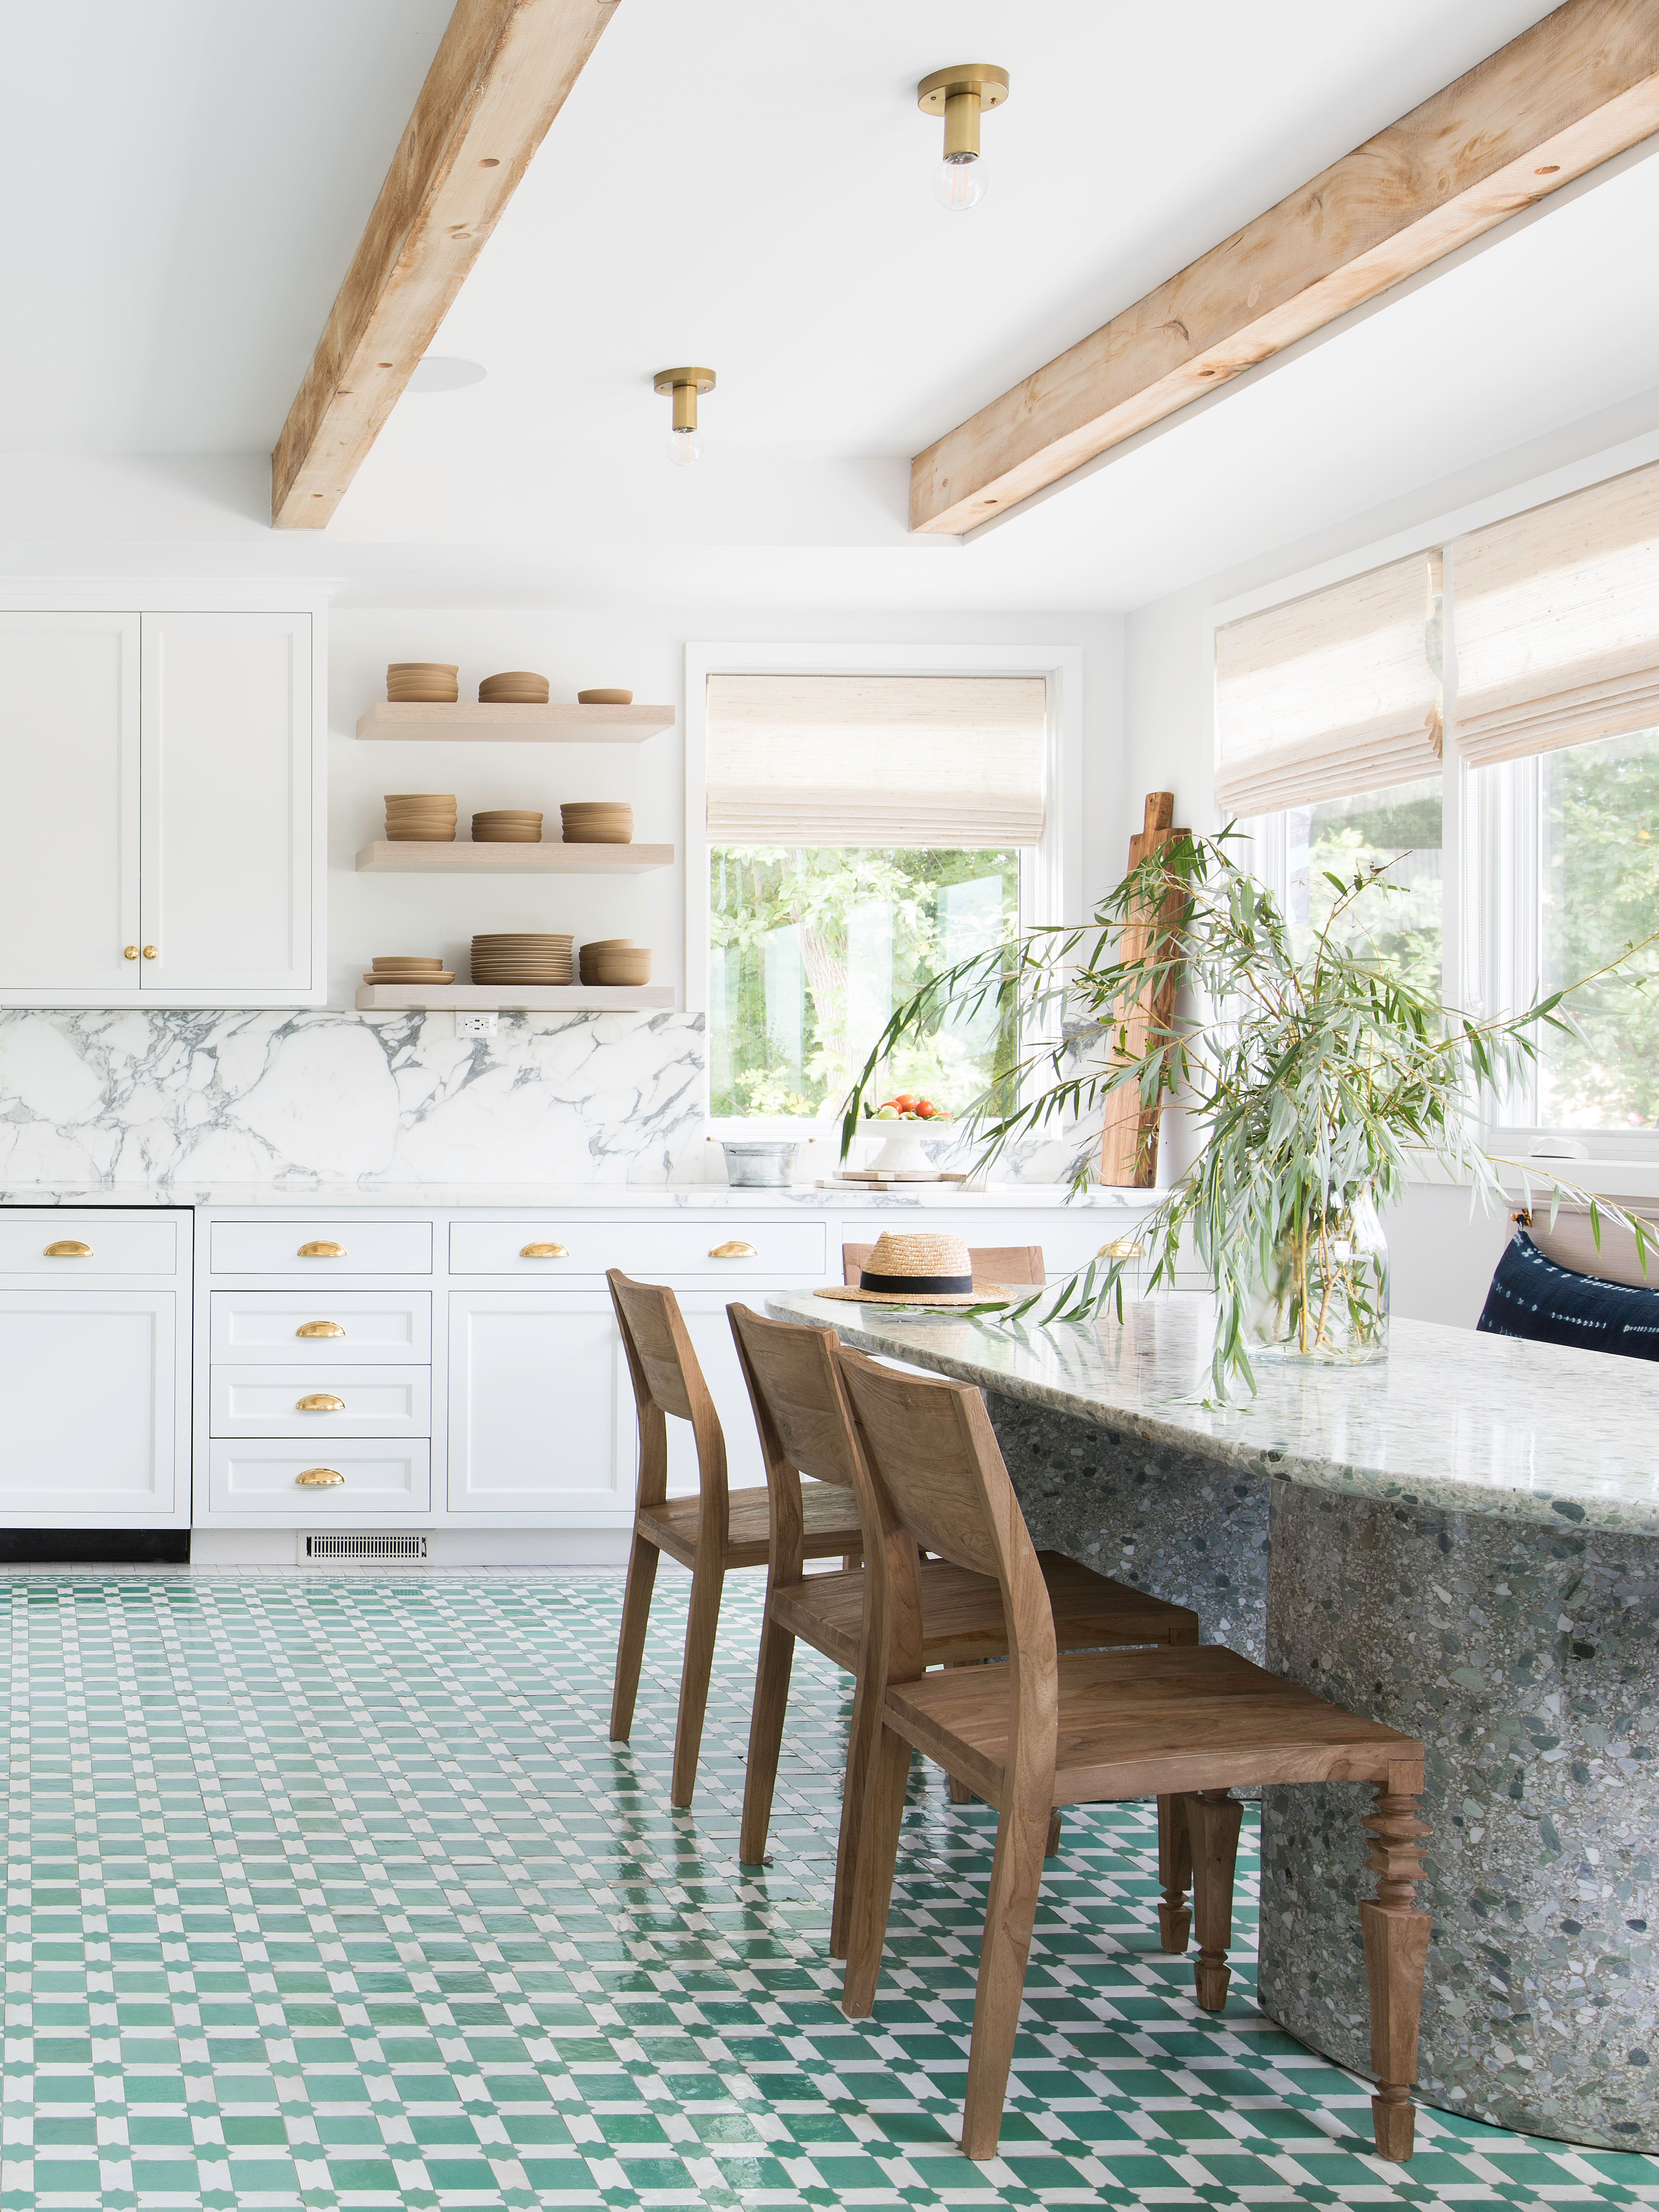 This Renovation Starts With Colorful Green Tile and Only Gets Better